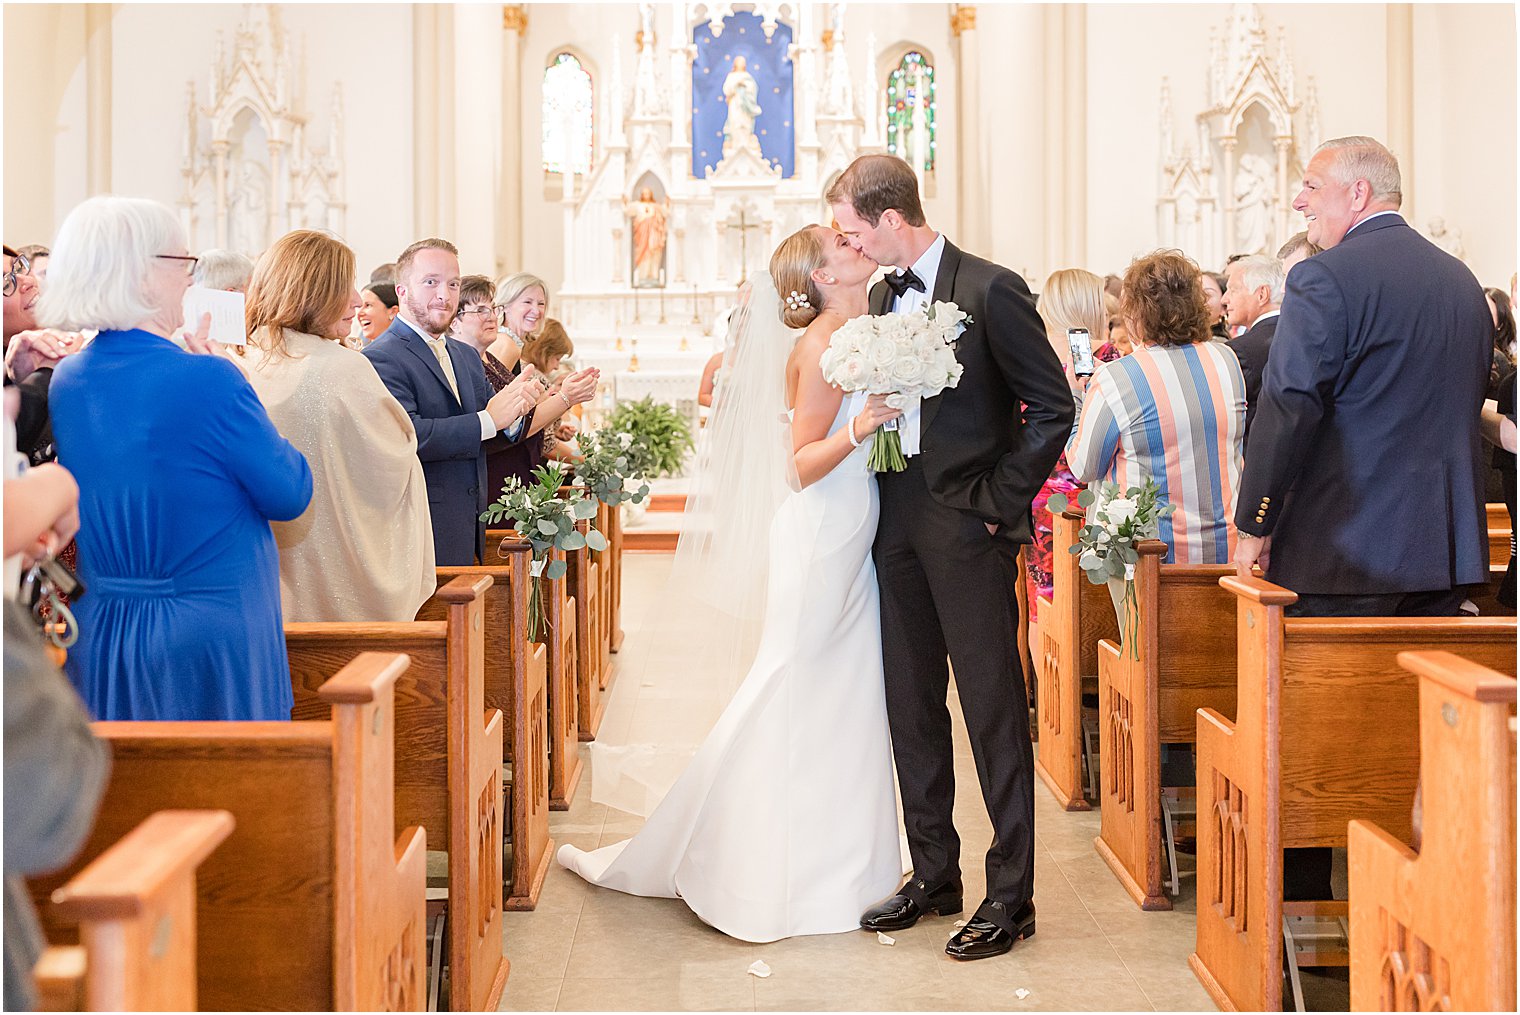 newlyweds kiss in aisle after traditional church wedding at St. Mary's Catholic Church